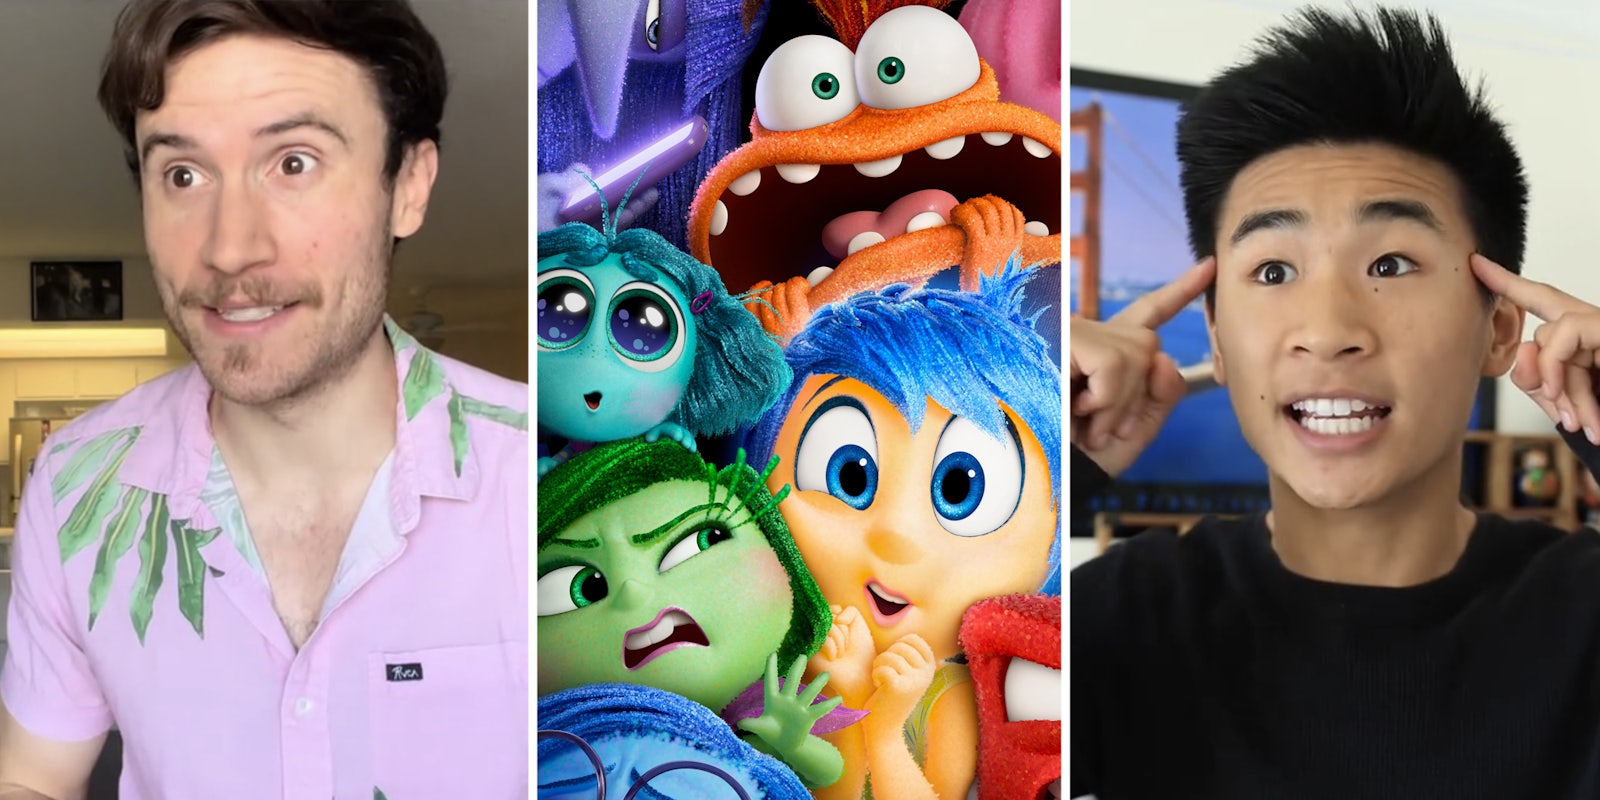 inside out 3 new emotions: Man 1 talking(l), Inside out 2 poster(c), Man 2 talking(r)